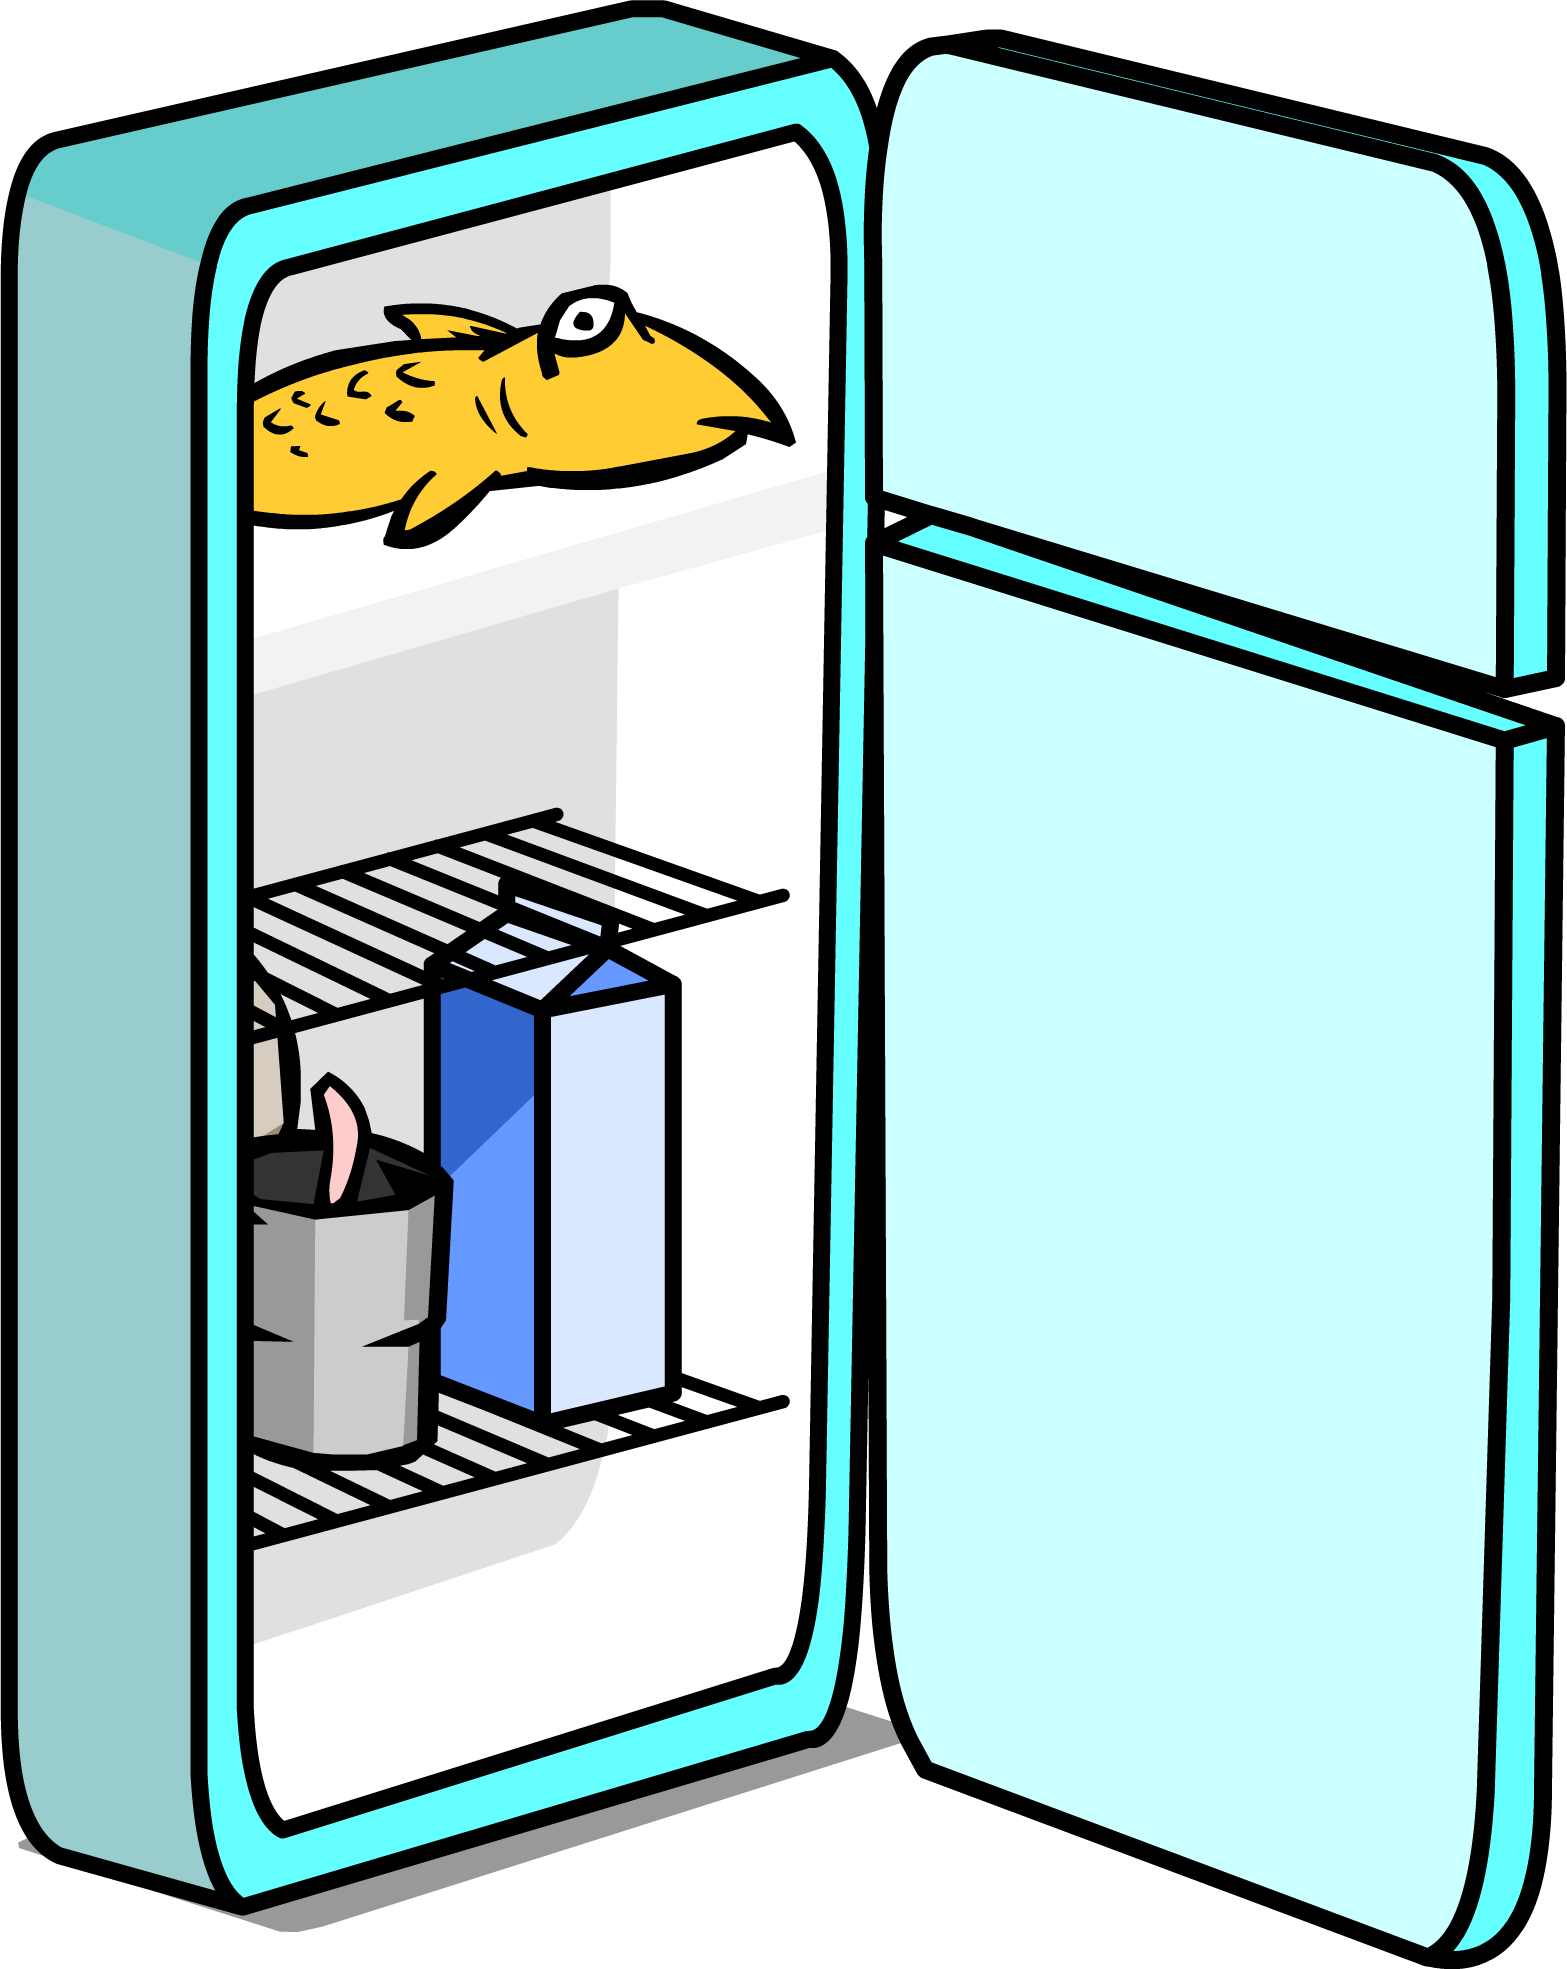 Fridge Refrigerator Clipart Outline Free Images At Cl - vrogue.co